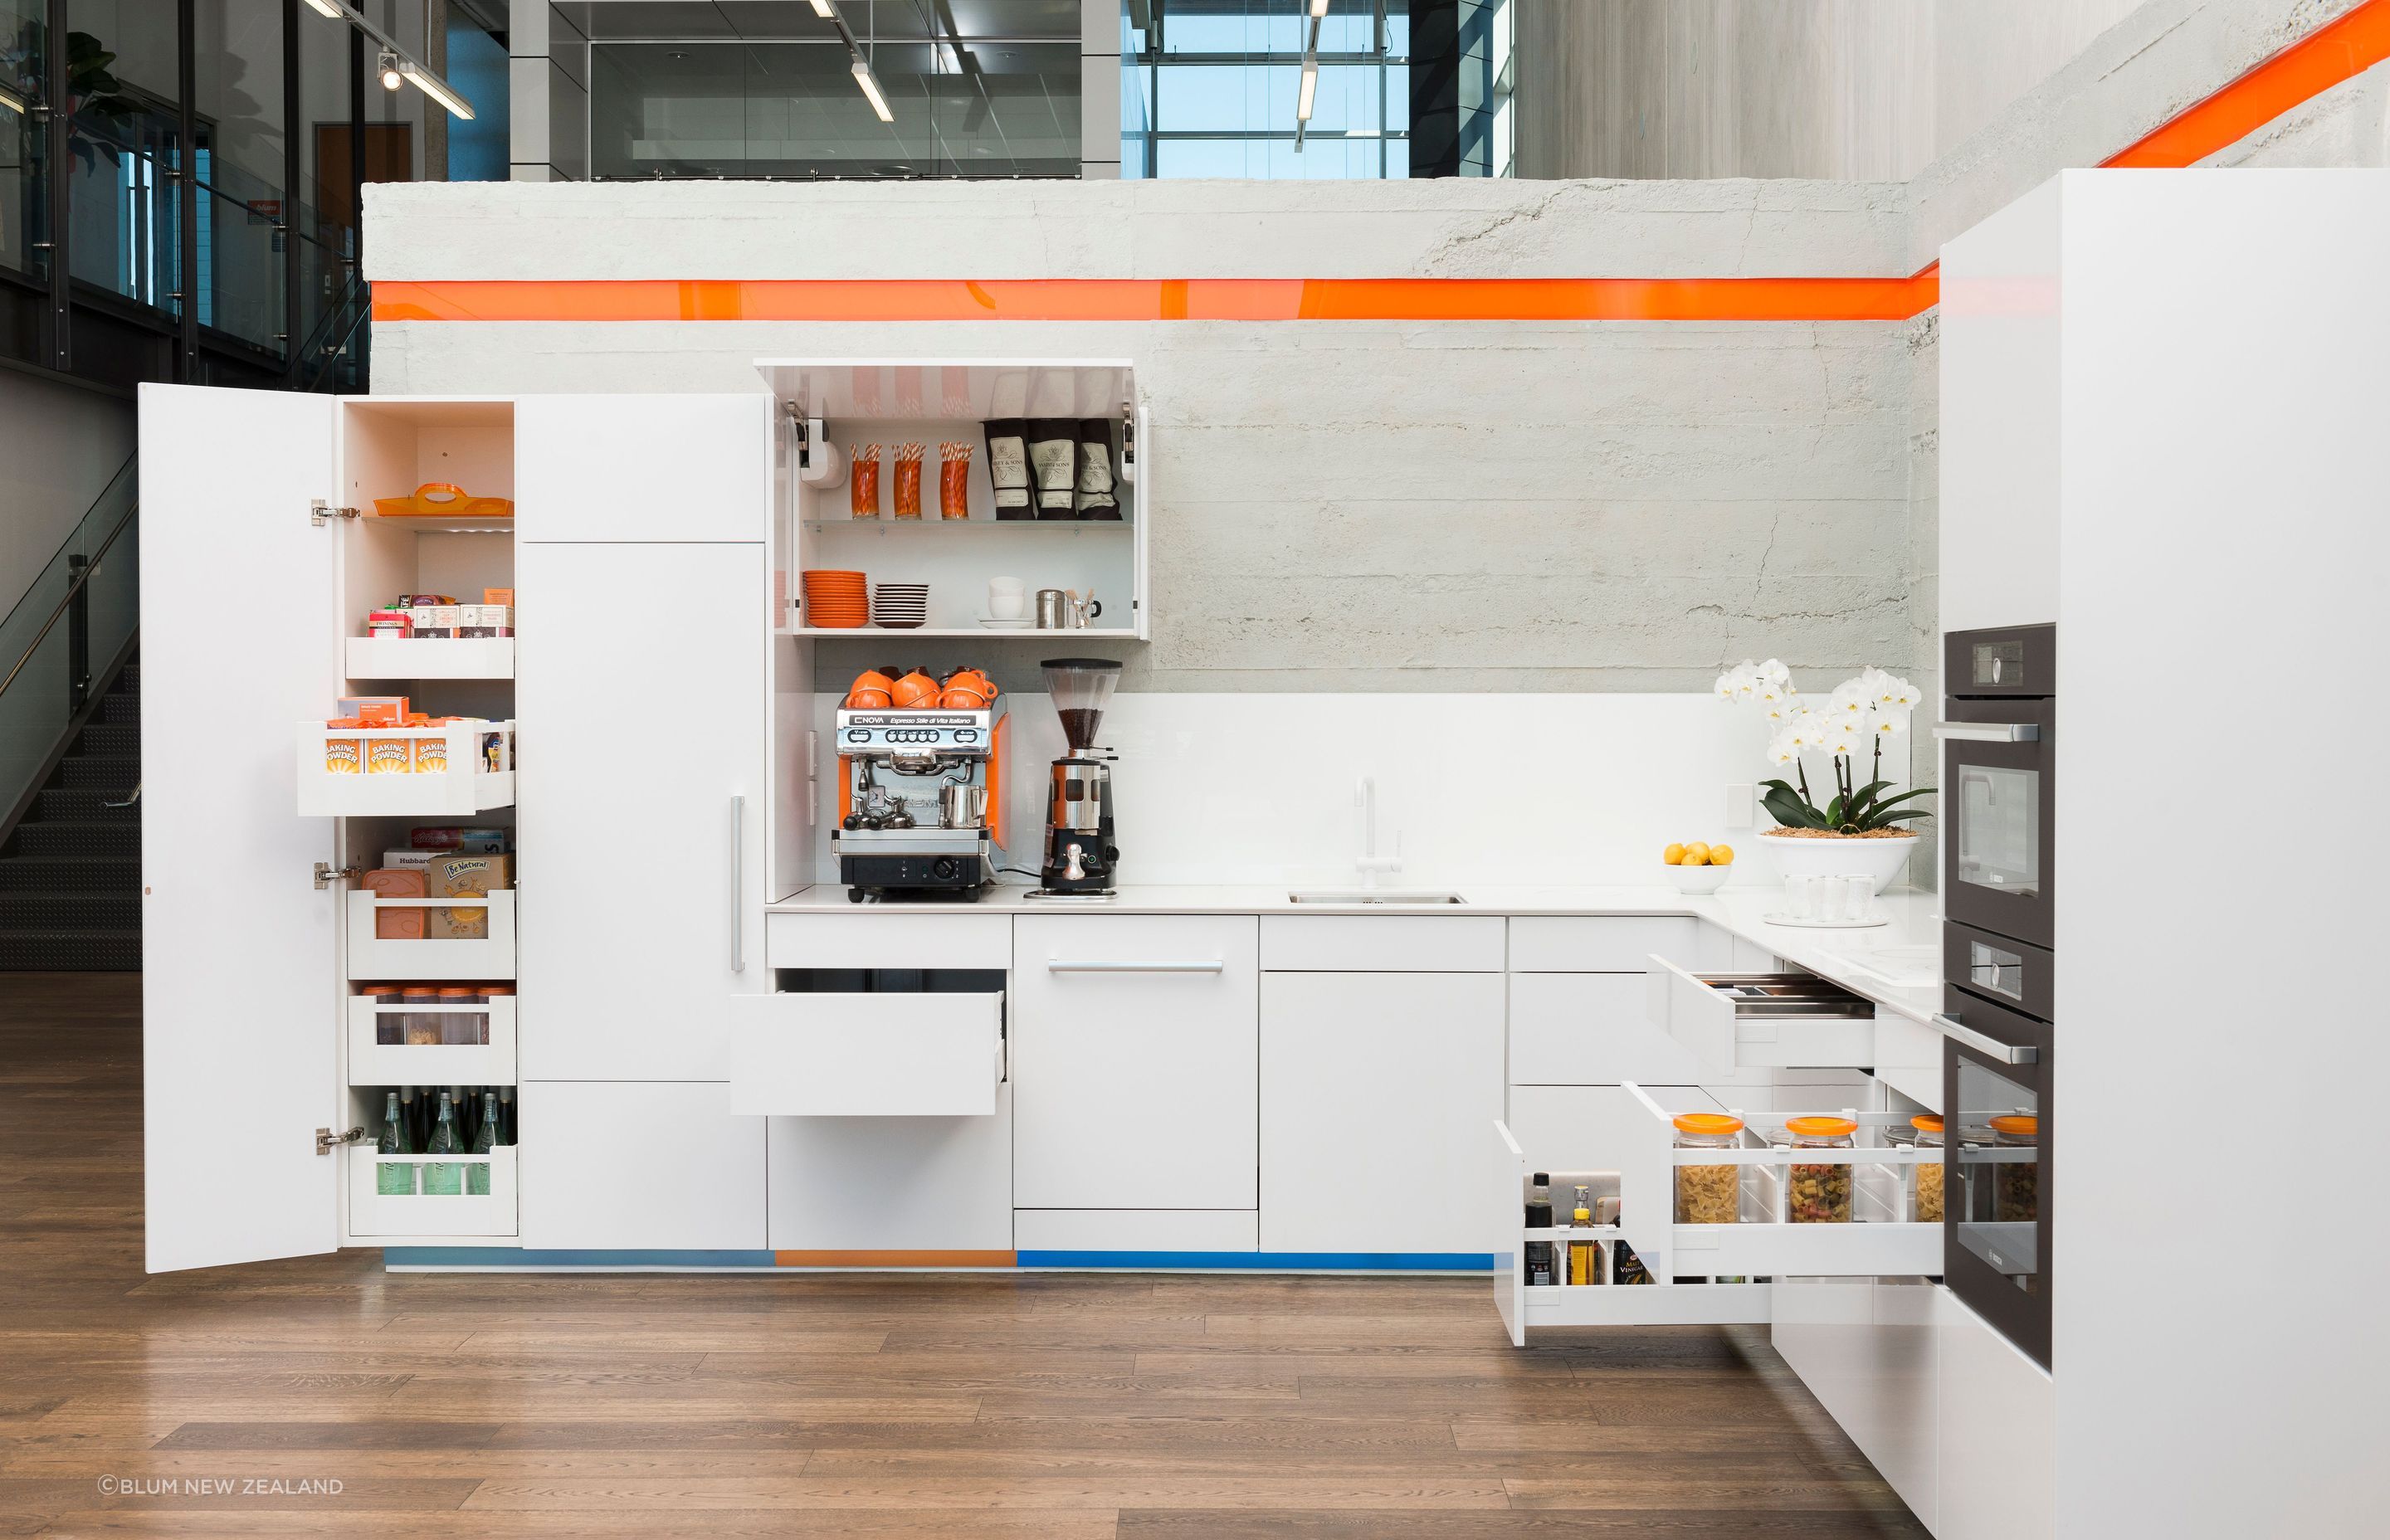 Visit Blum’s showrooms without leaving your room